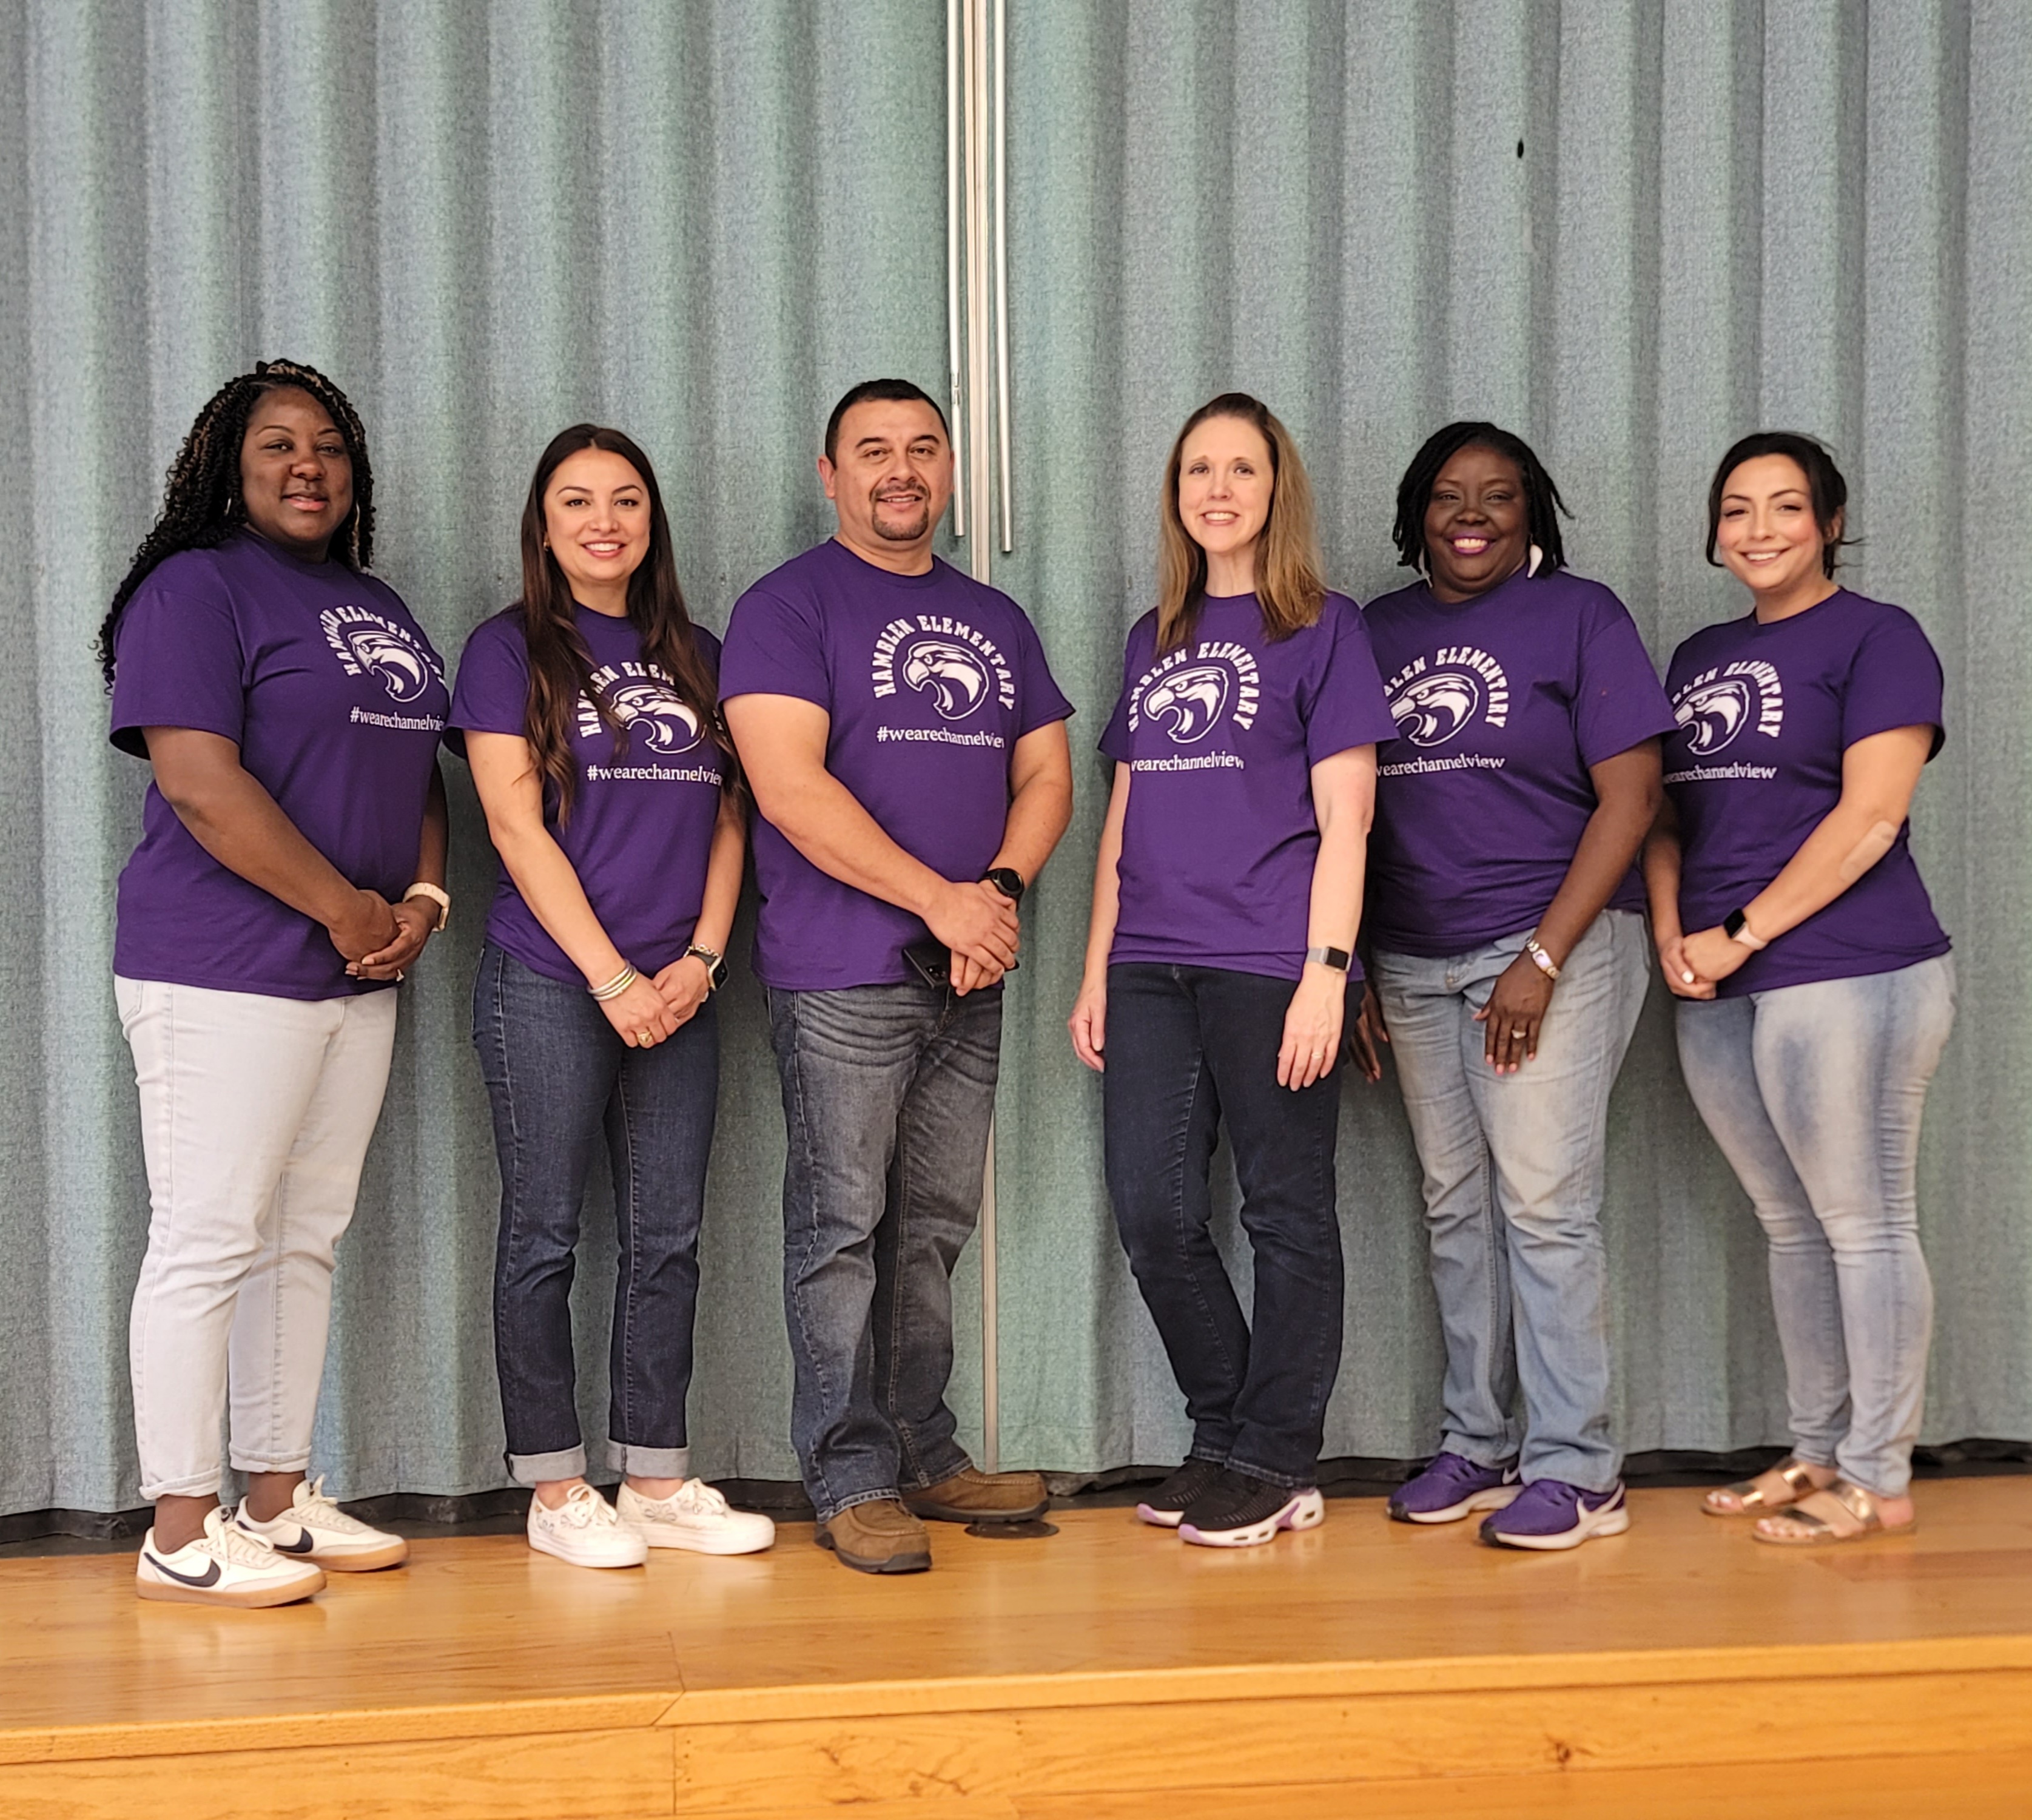 Our Administrative Team. Left to Right:  Ms. Thompson (counselor), Ms. Sanchez (Assistant Principal), Mr. Lopez (Principal), Ms. Logan (Assistant Principal), Ms. Baker (Counselor), Ms. Cabello (Instructional Liason)